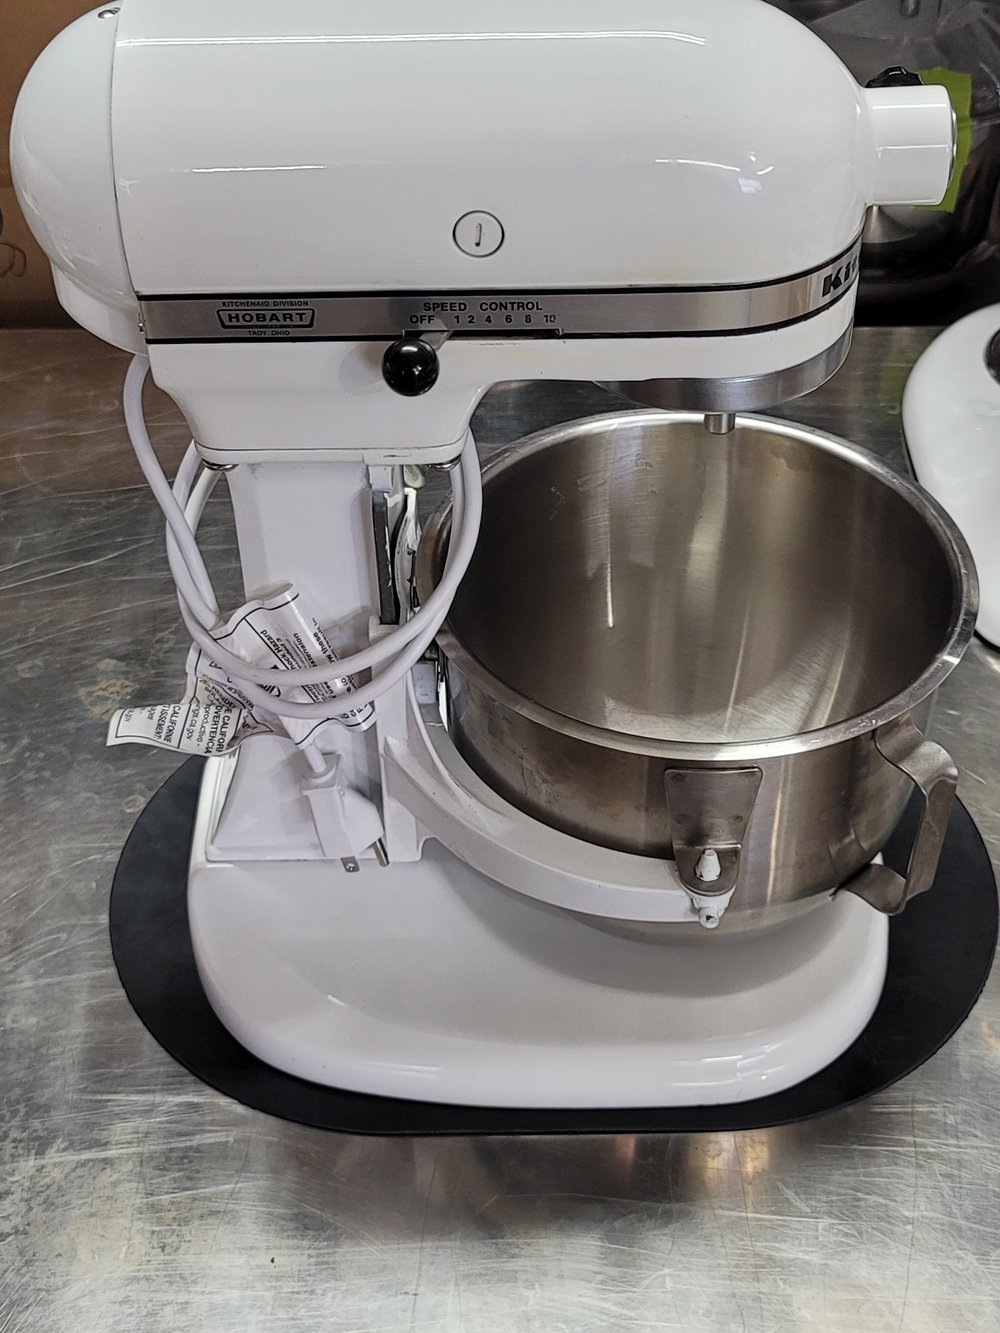 KitchenAid K5SS Heavy Duty 10-Speed Stand Mixer with 5 qt Bowl and  Attachments